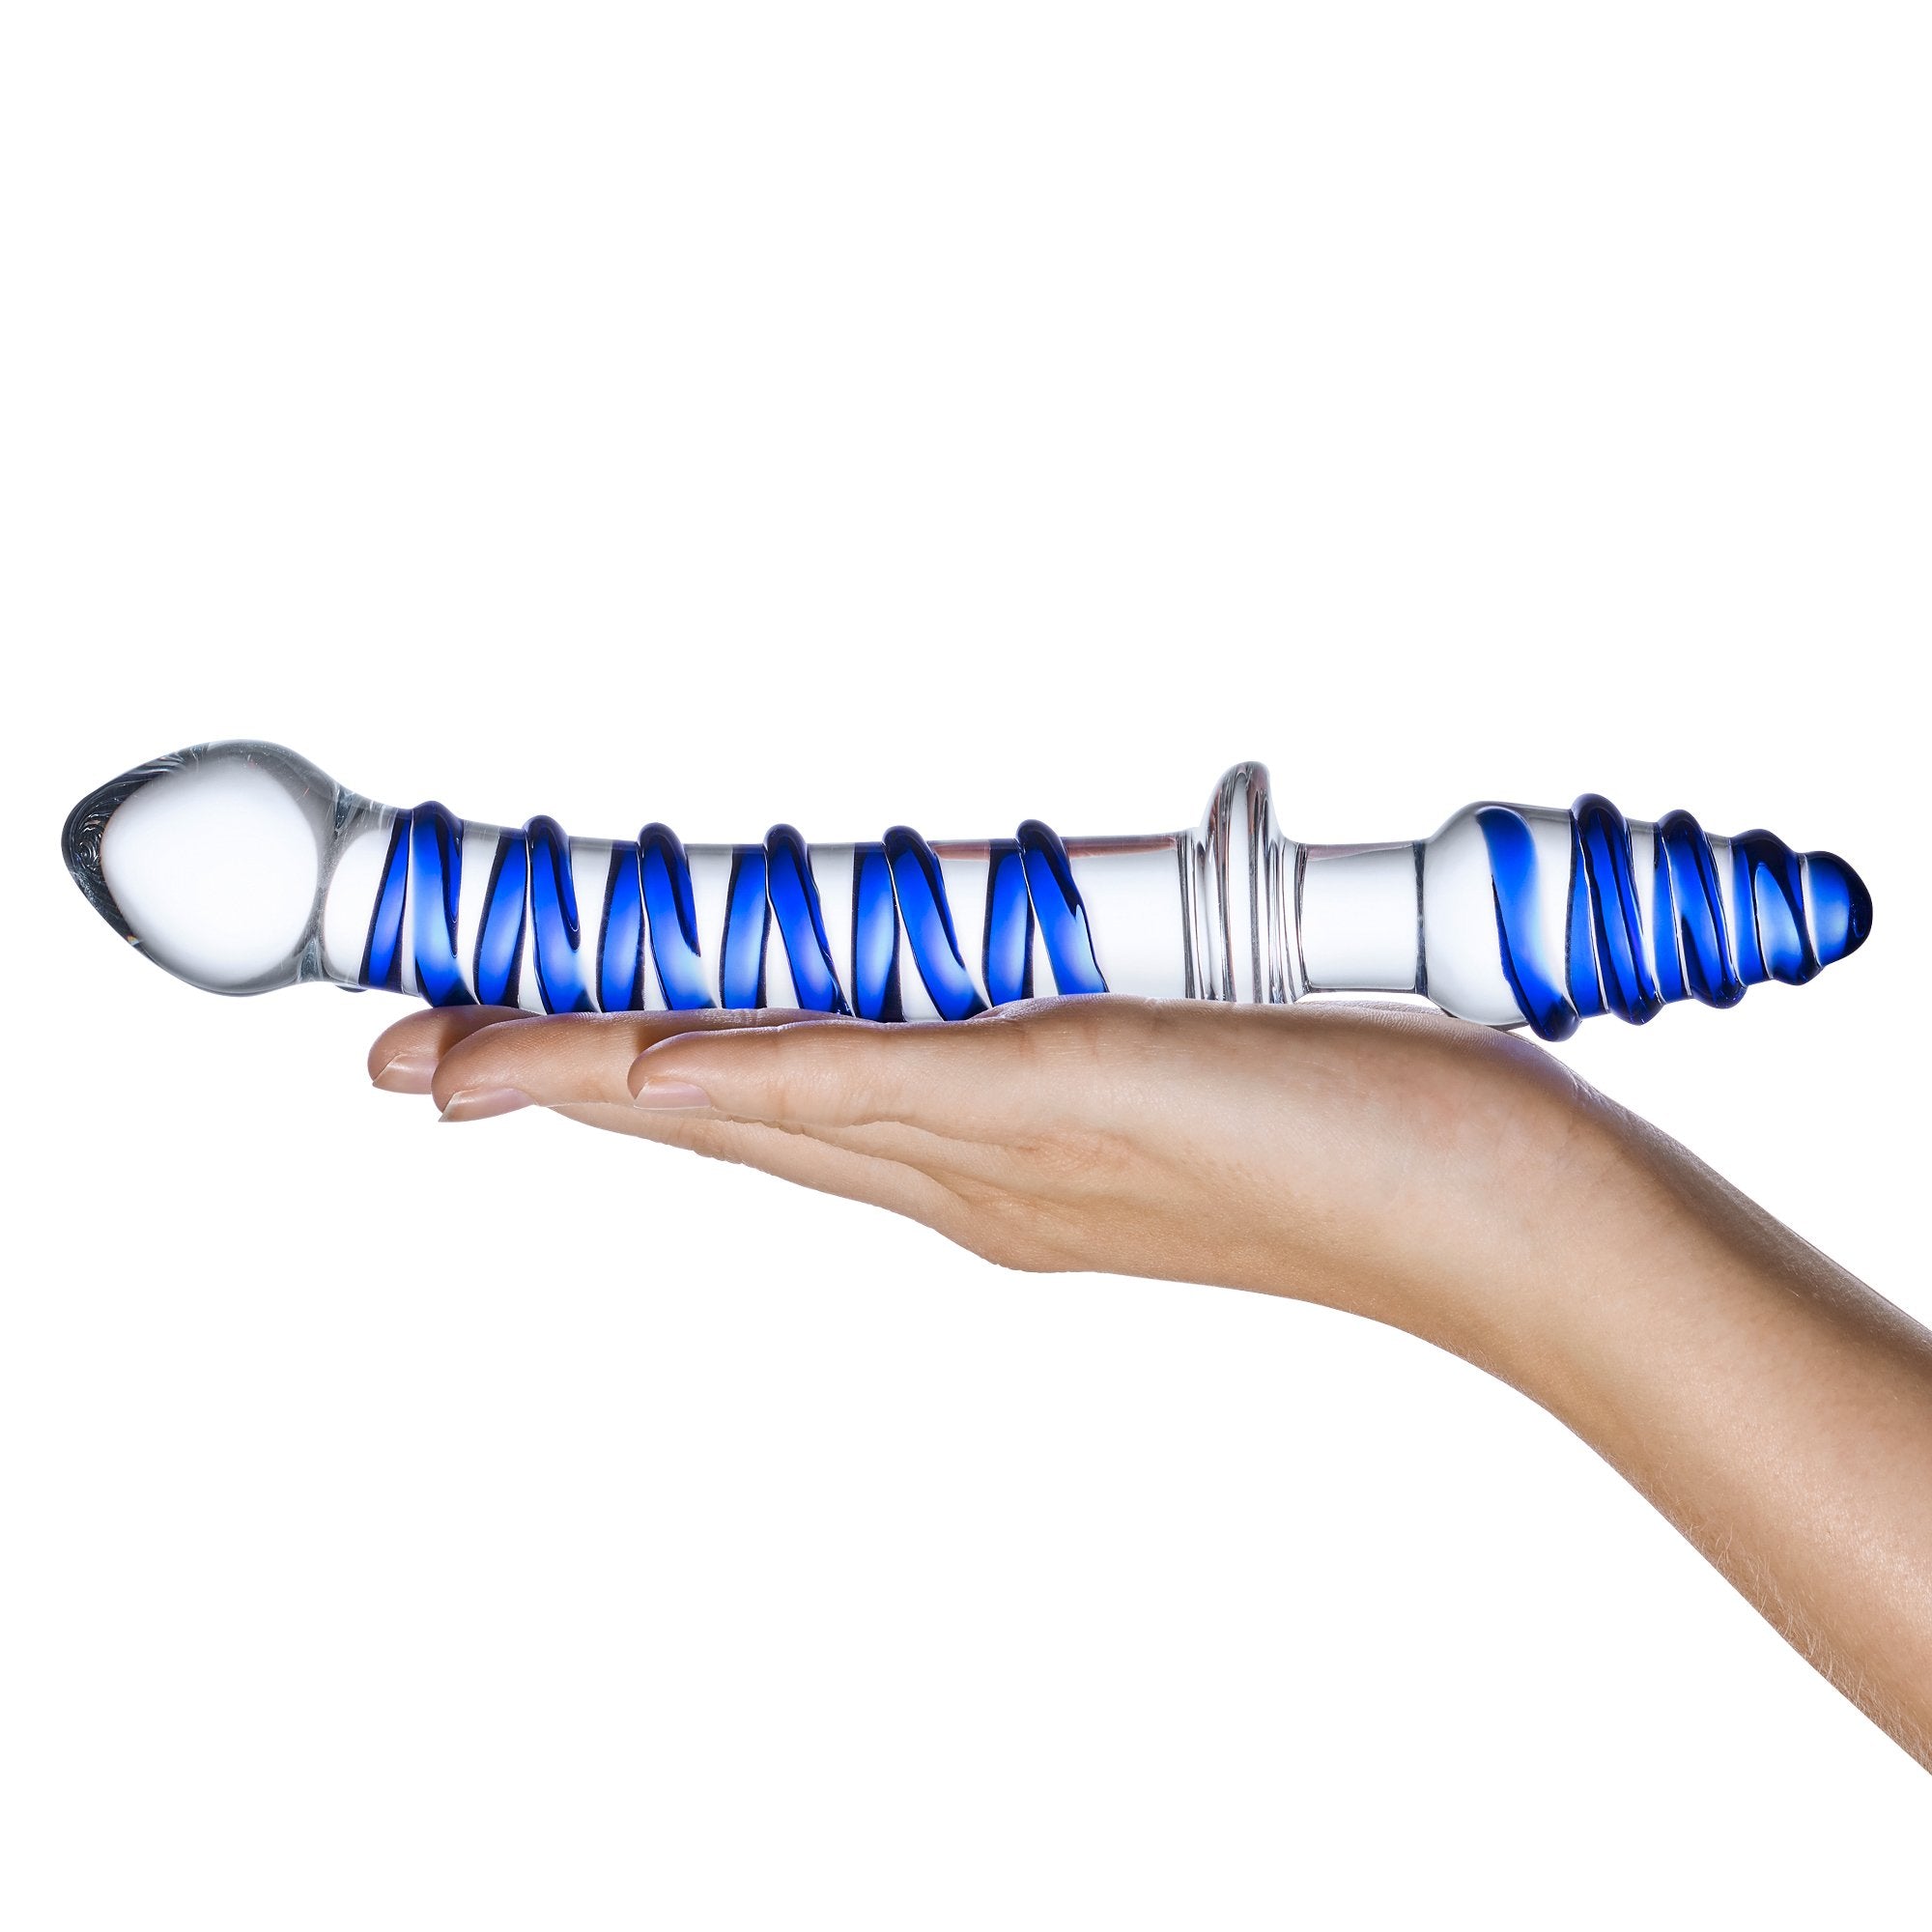 Gläs 10 inch Mr. Swirly Double Ended Glass Dildo and Butt Plug